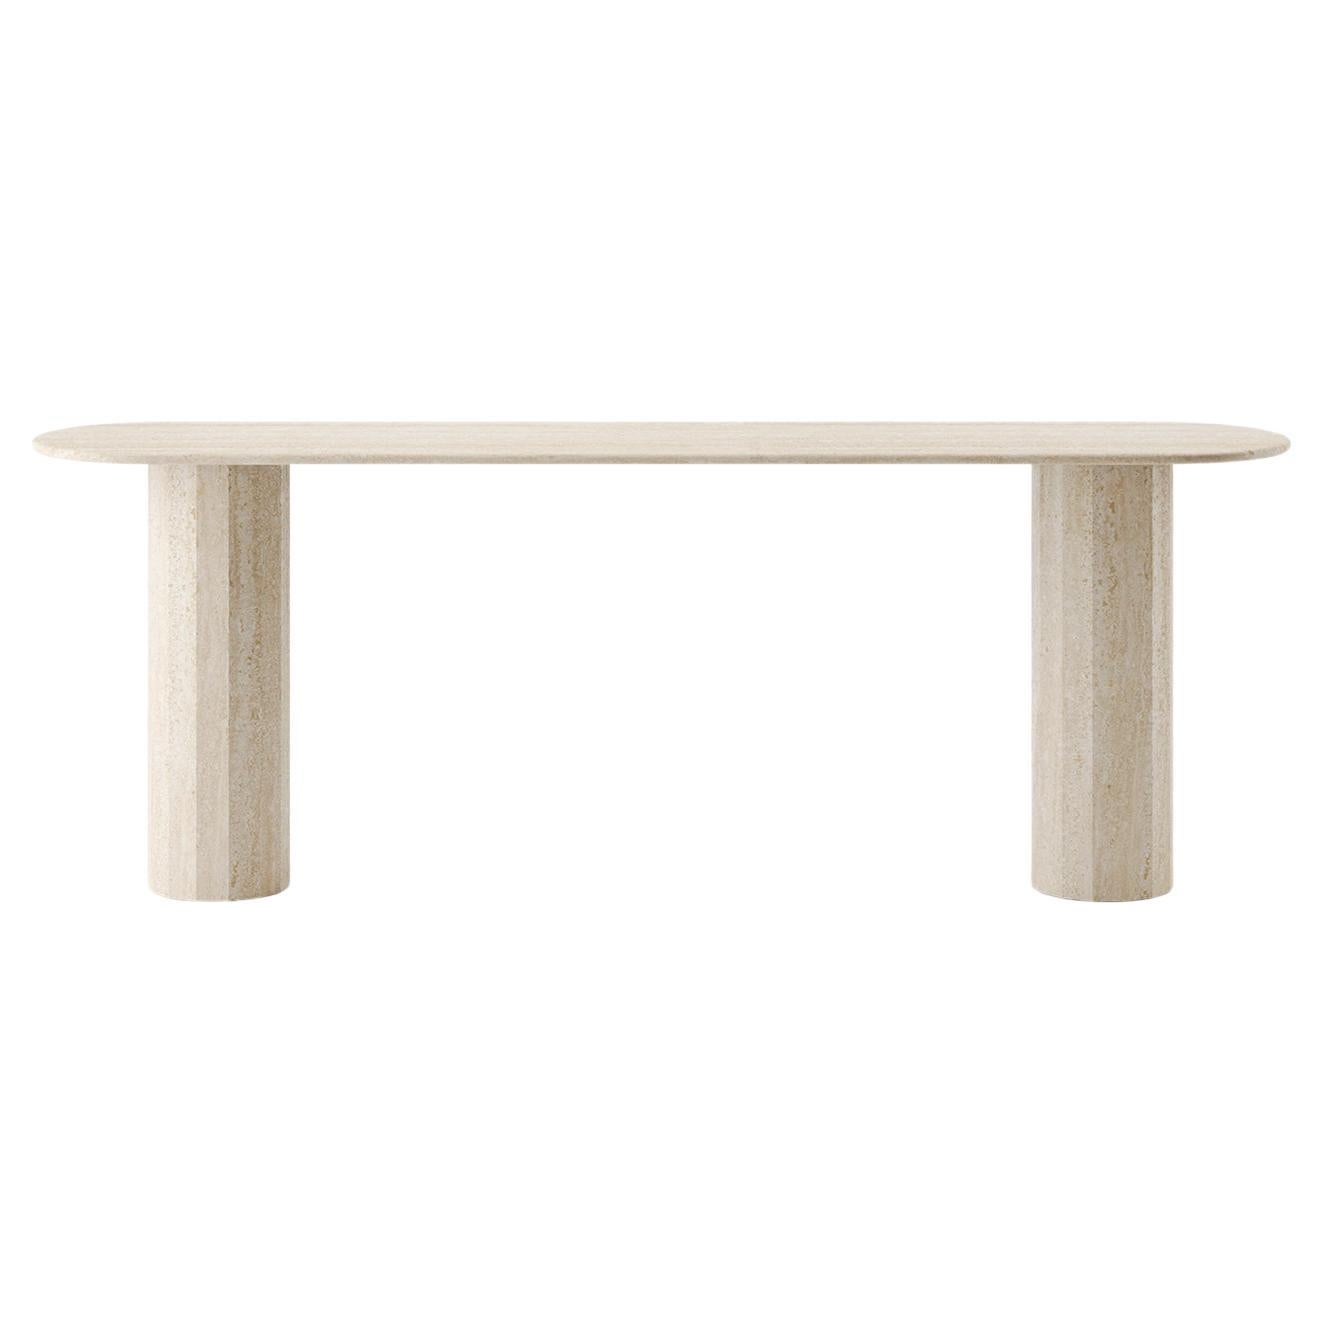 Ashby Console Handcrafted in Travertine by Lemon For Sale